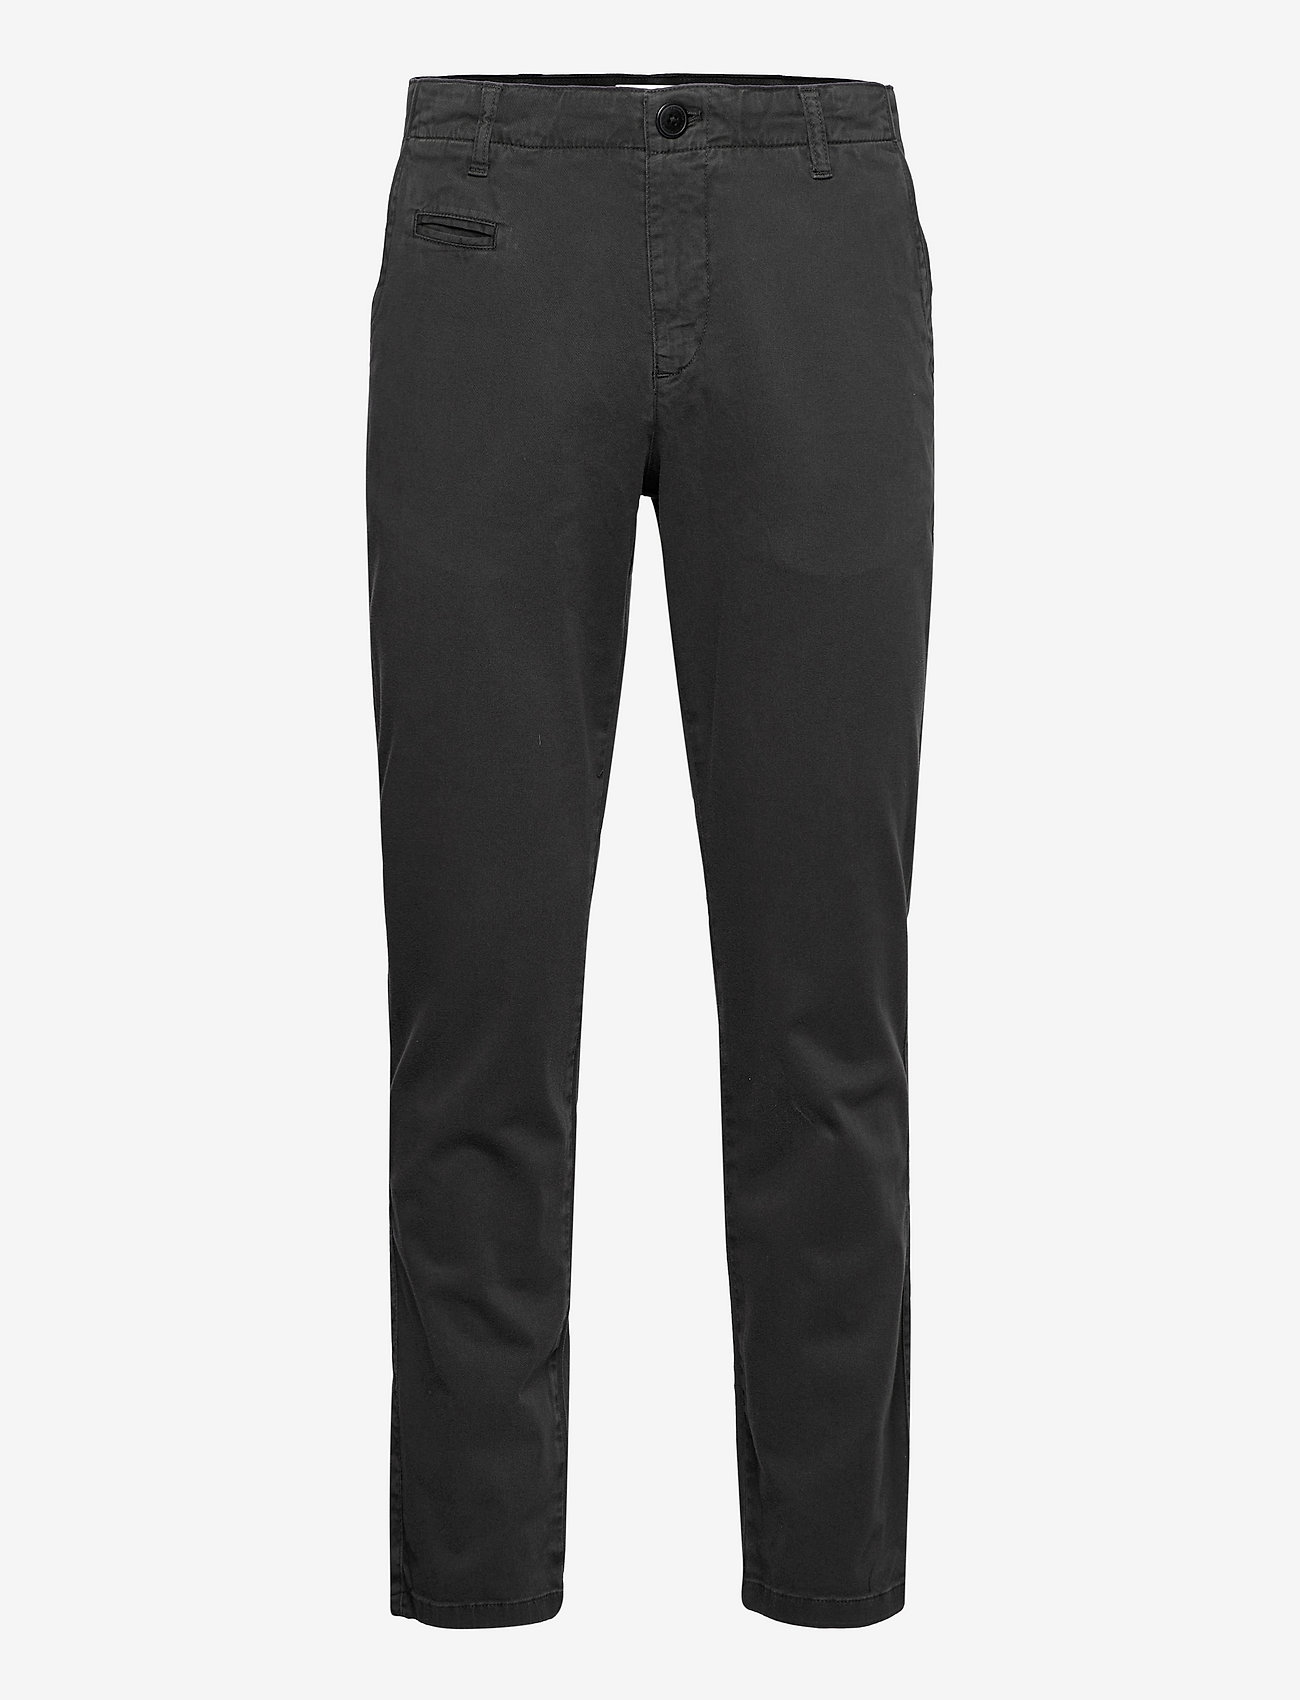 Knowledge Cotton Apparel - CHUCK regular stretched chino pant - chinos - black jet - 0